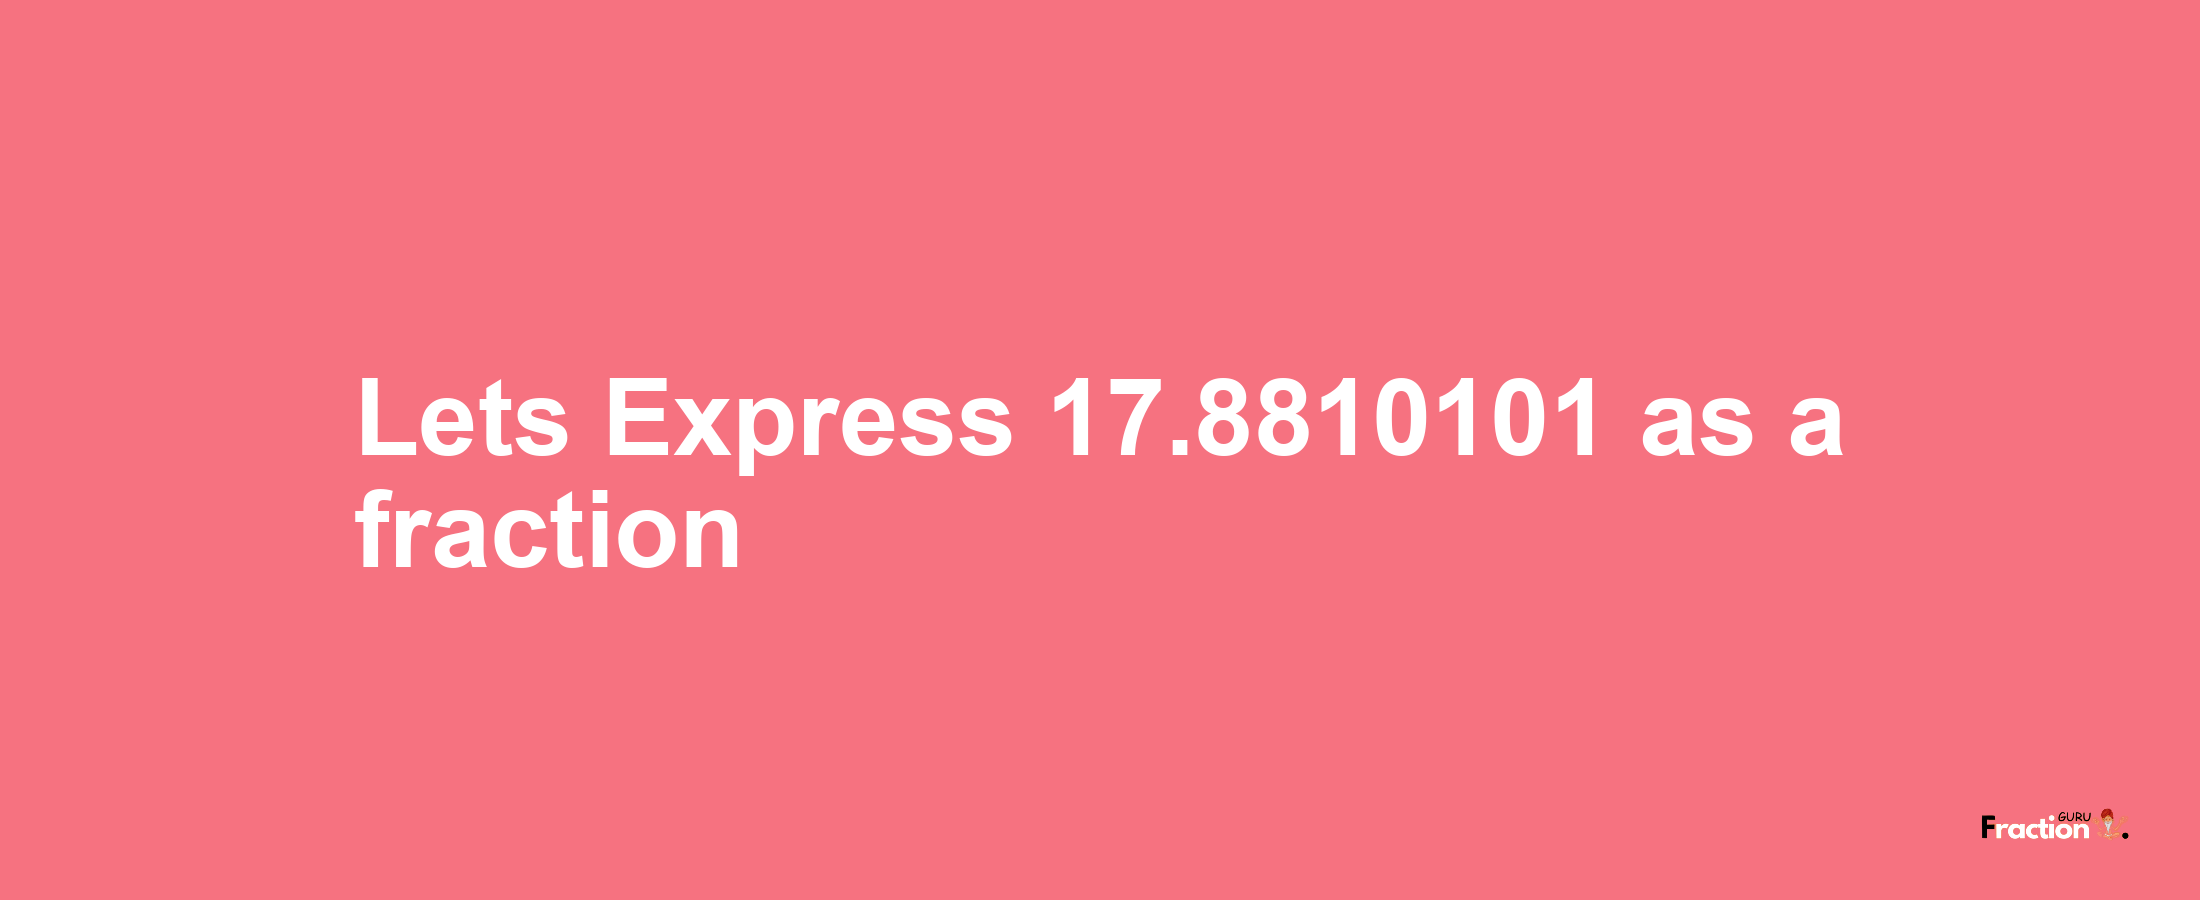 Lets Express 17.8810101 as afraction